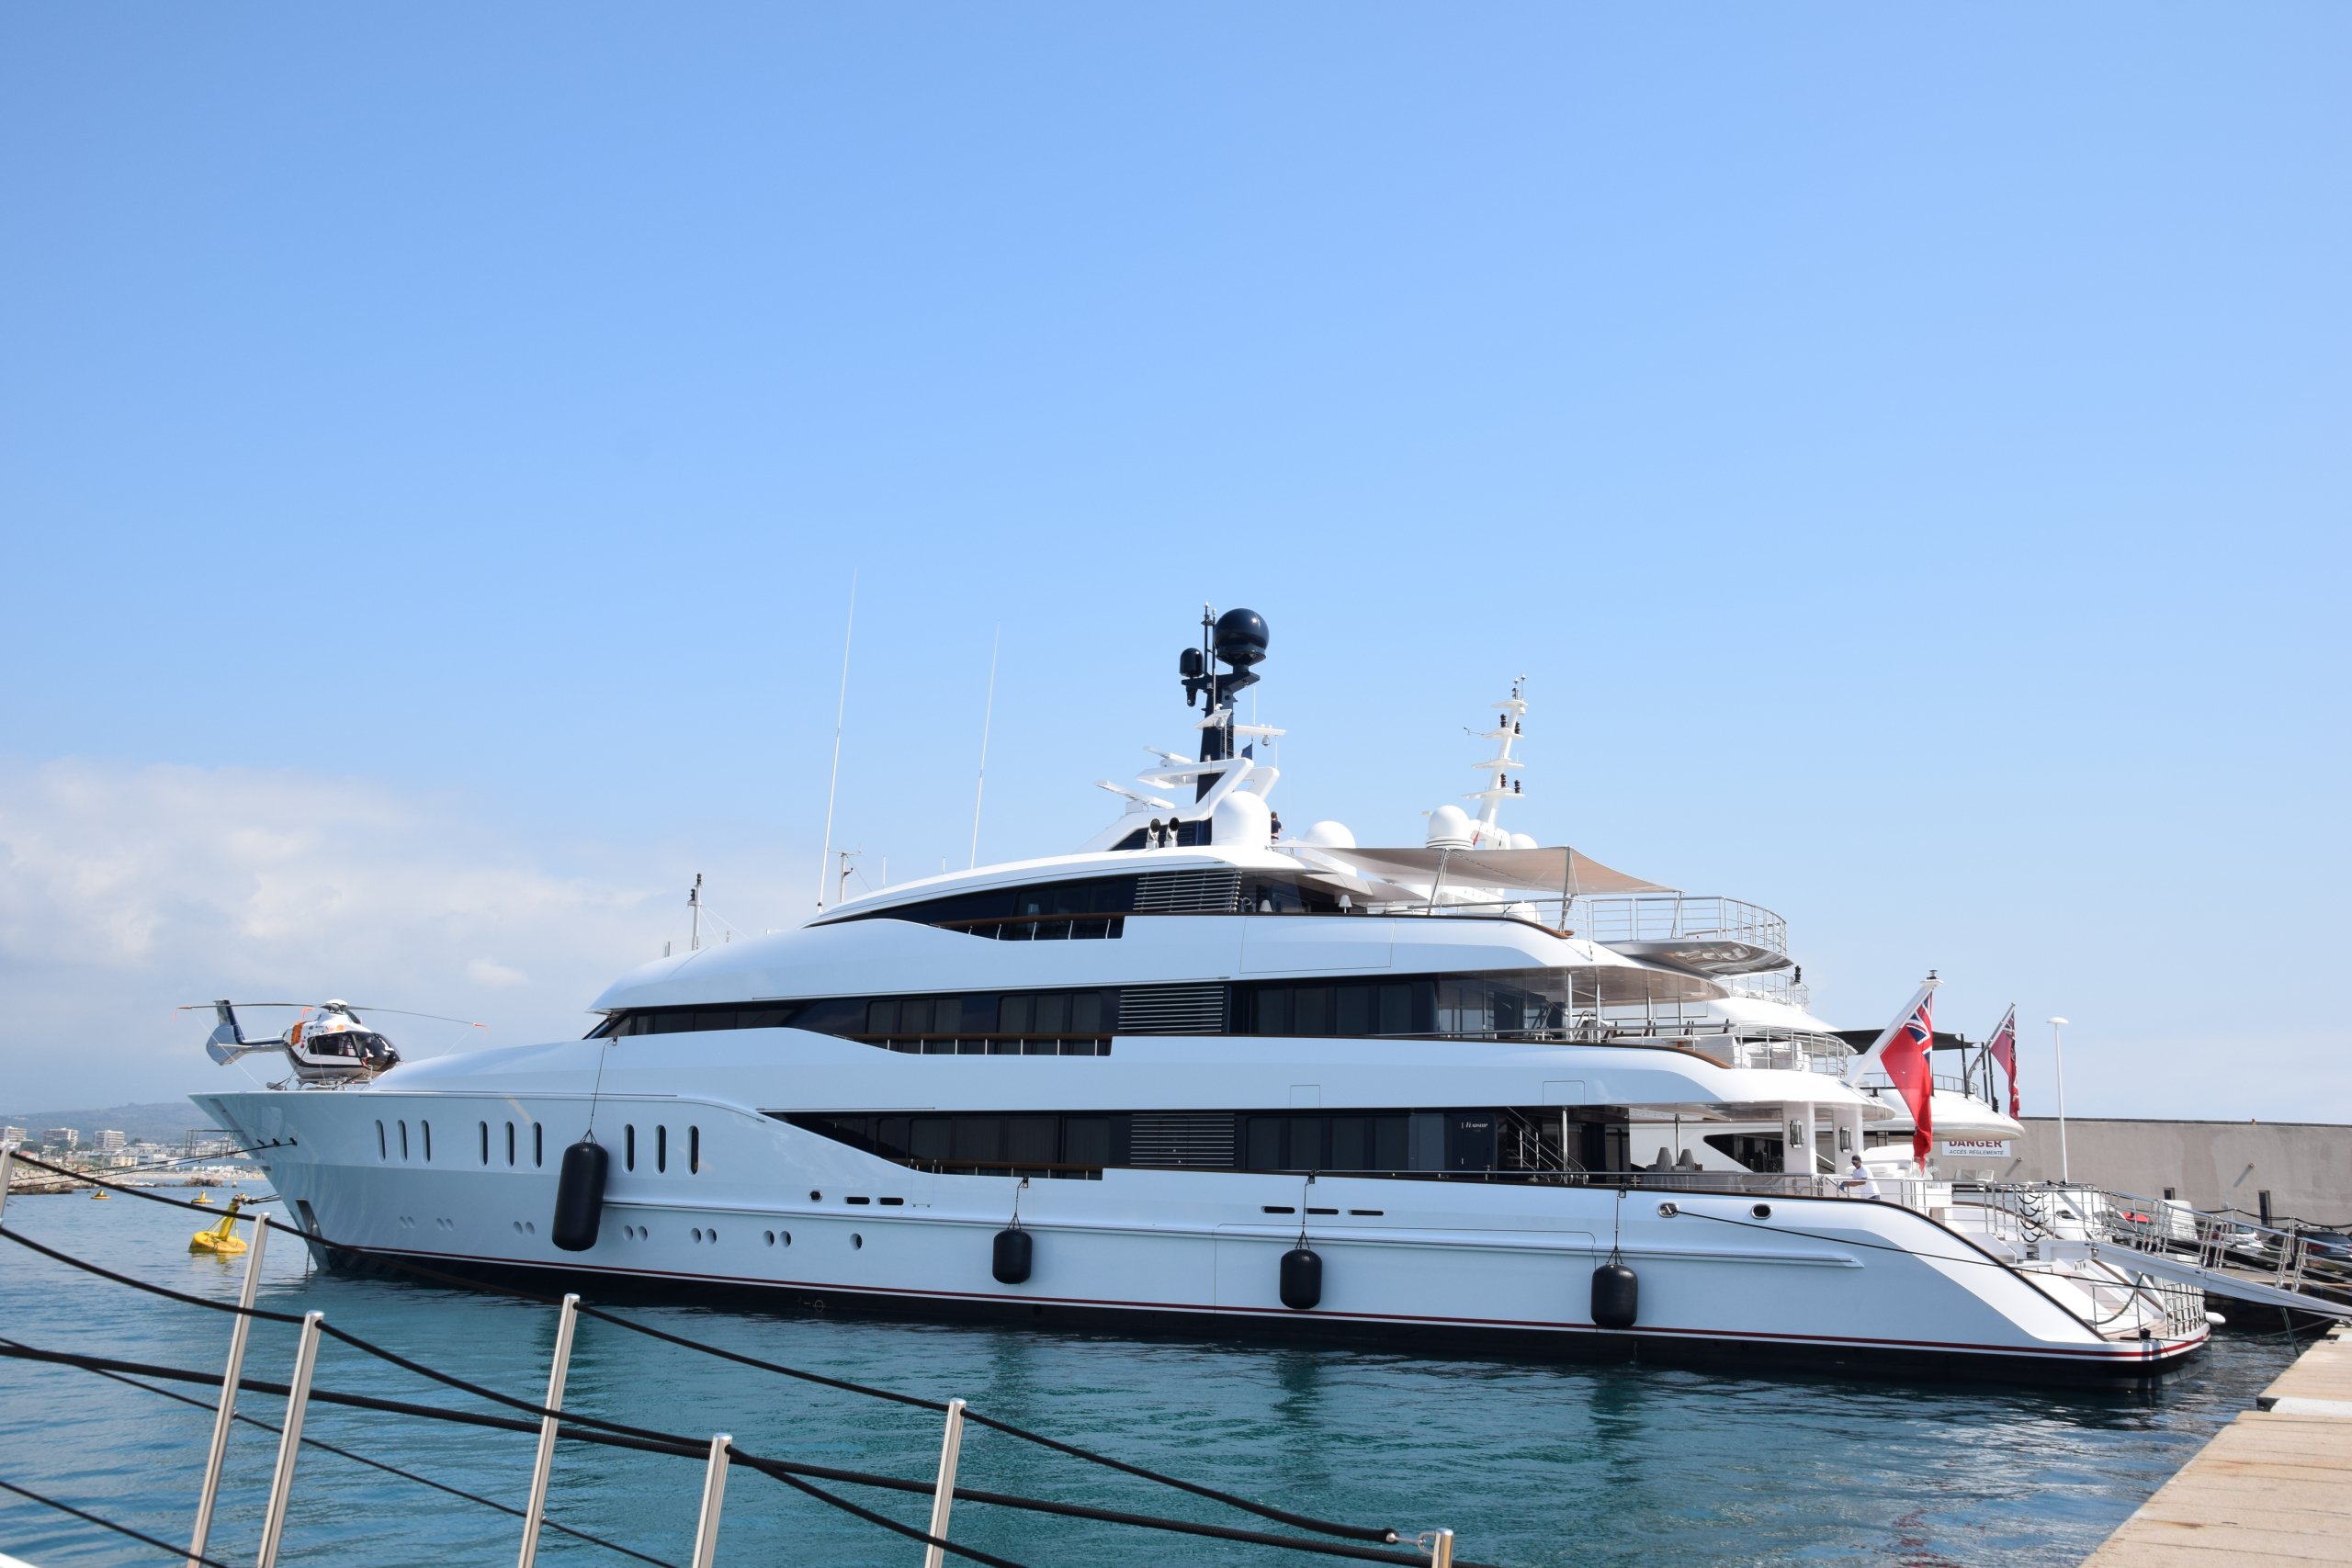 HAMPSHIRE Yacht • Feadship • 2016 • 66 m • Besitzer Andrew Currie